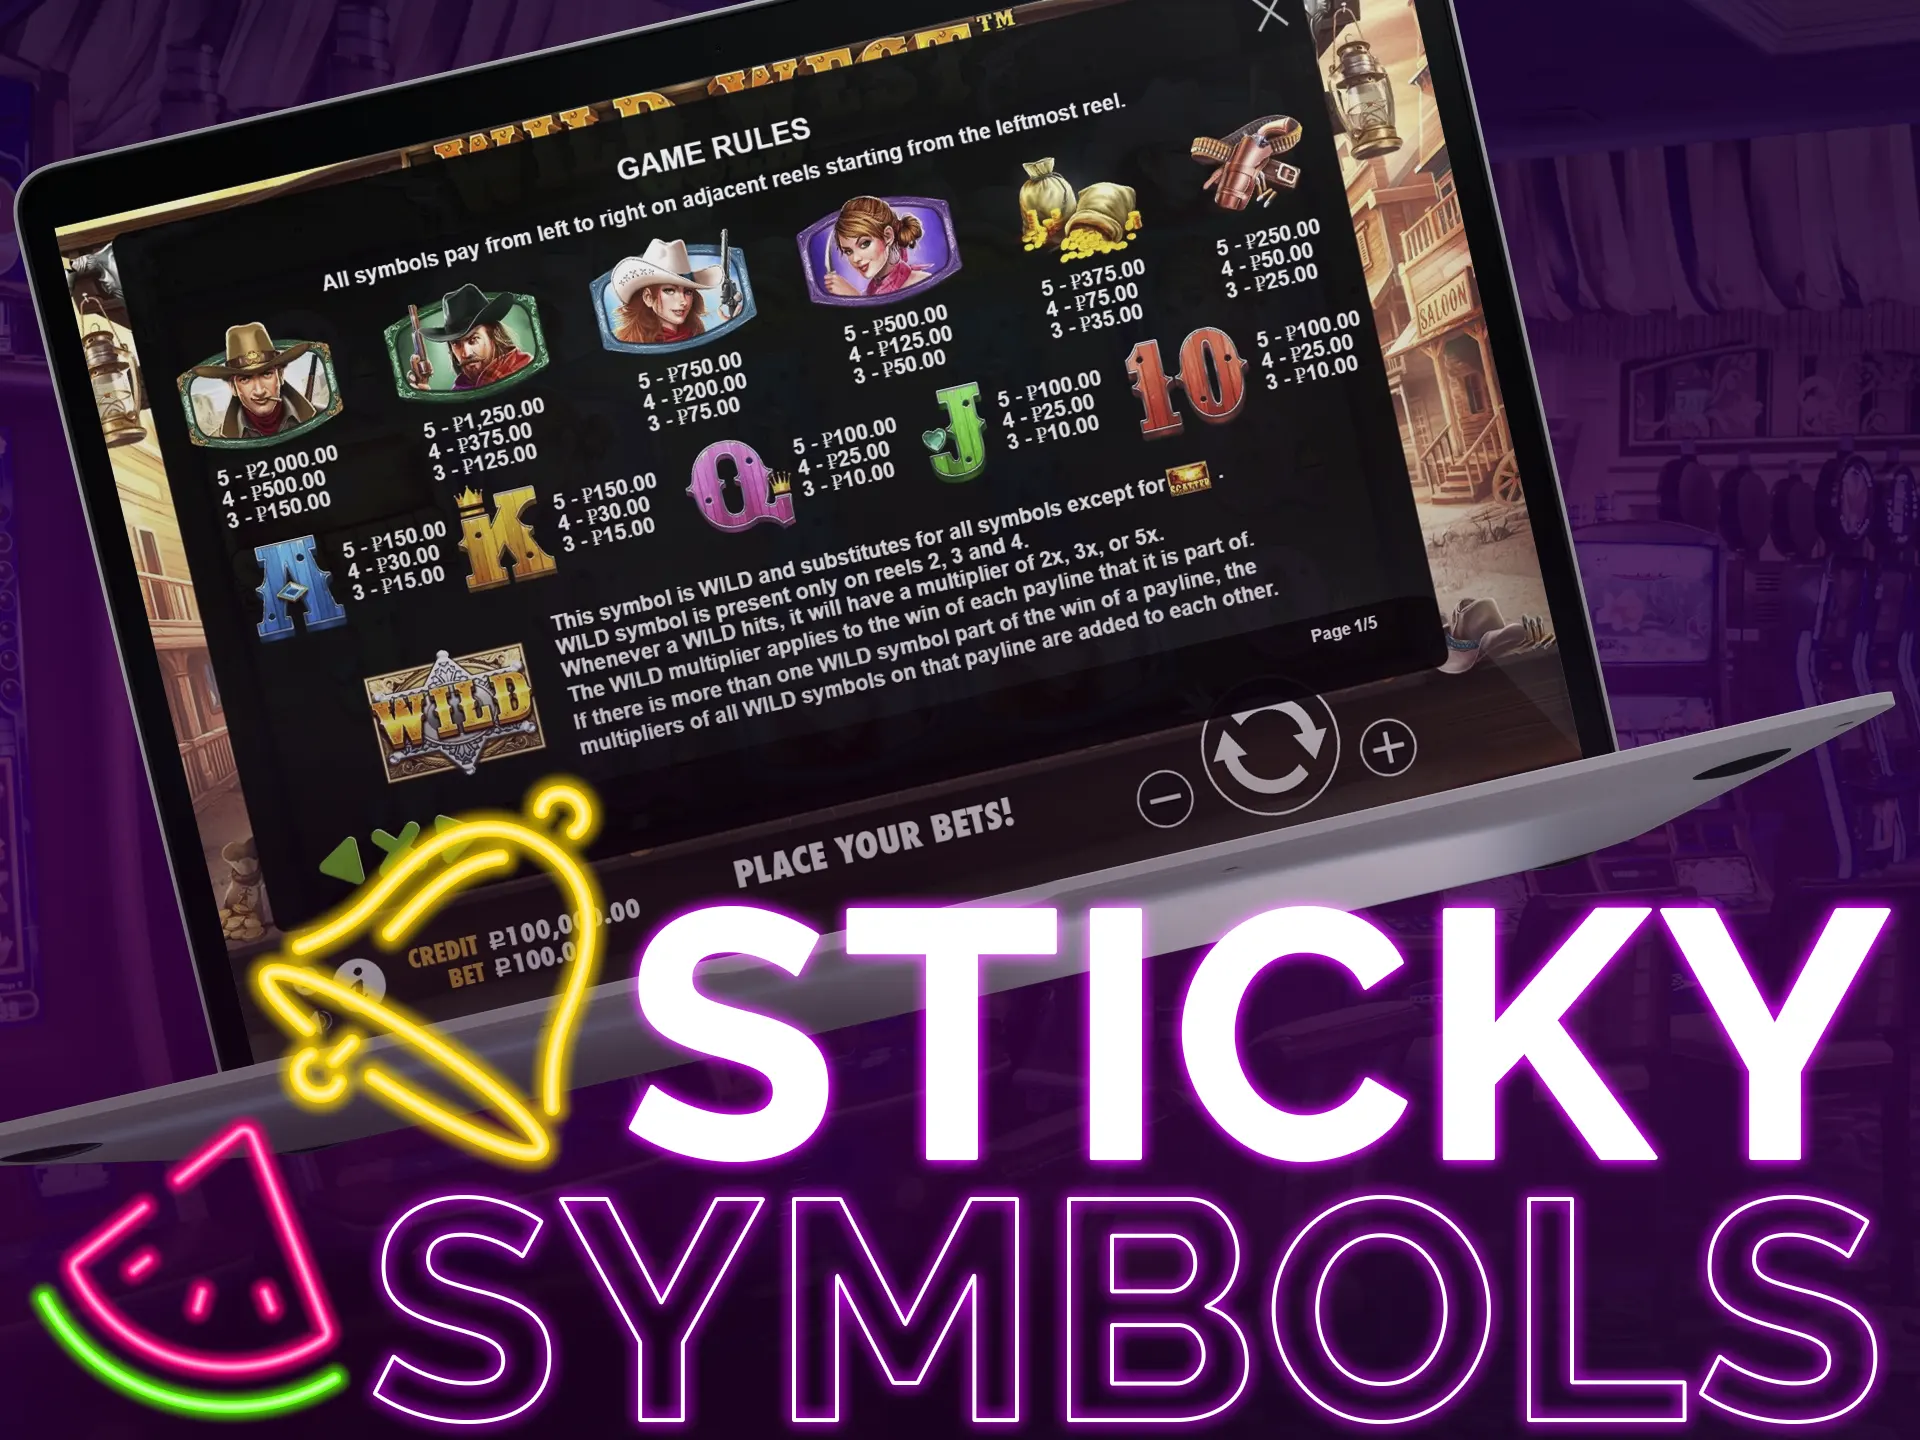 Sticky symbols stay for multiple spins, common in free spins.